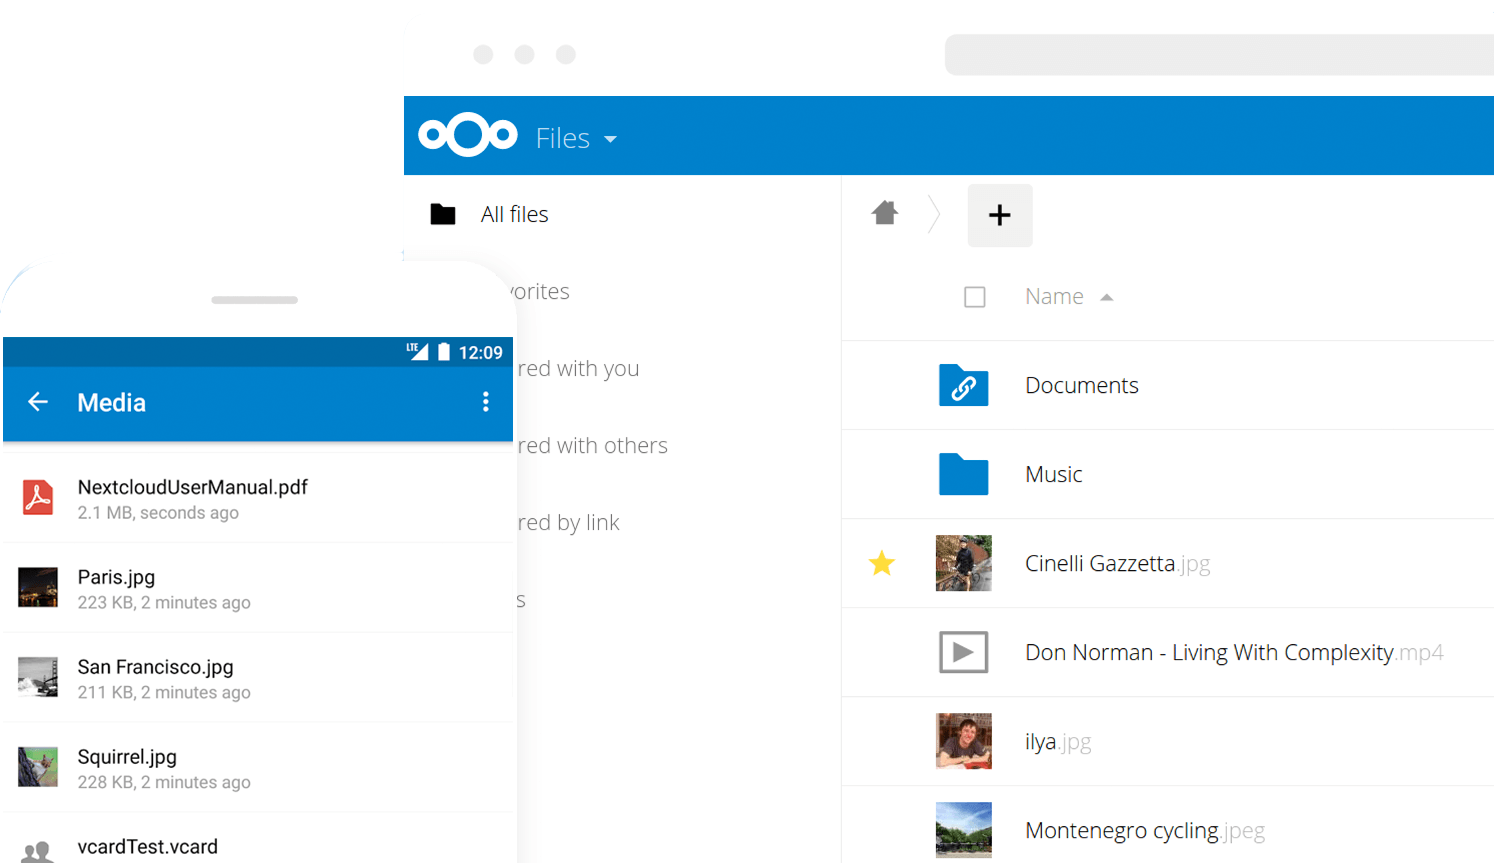 Nextcloud Hub provides the benefits of online collaboration without the compliance and security risks.